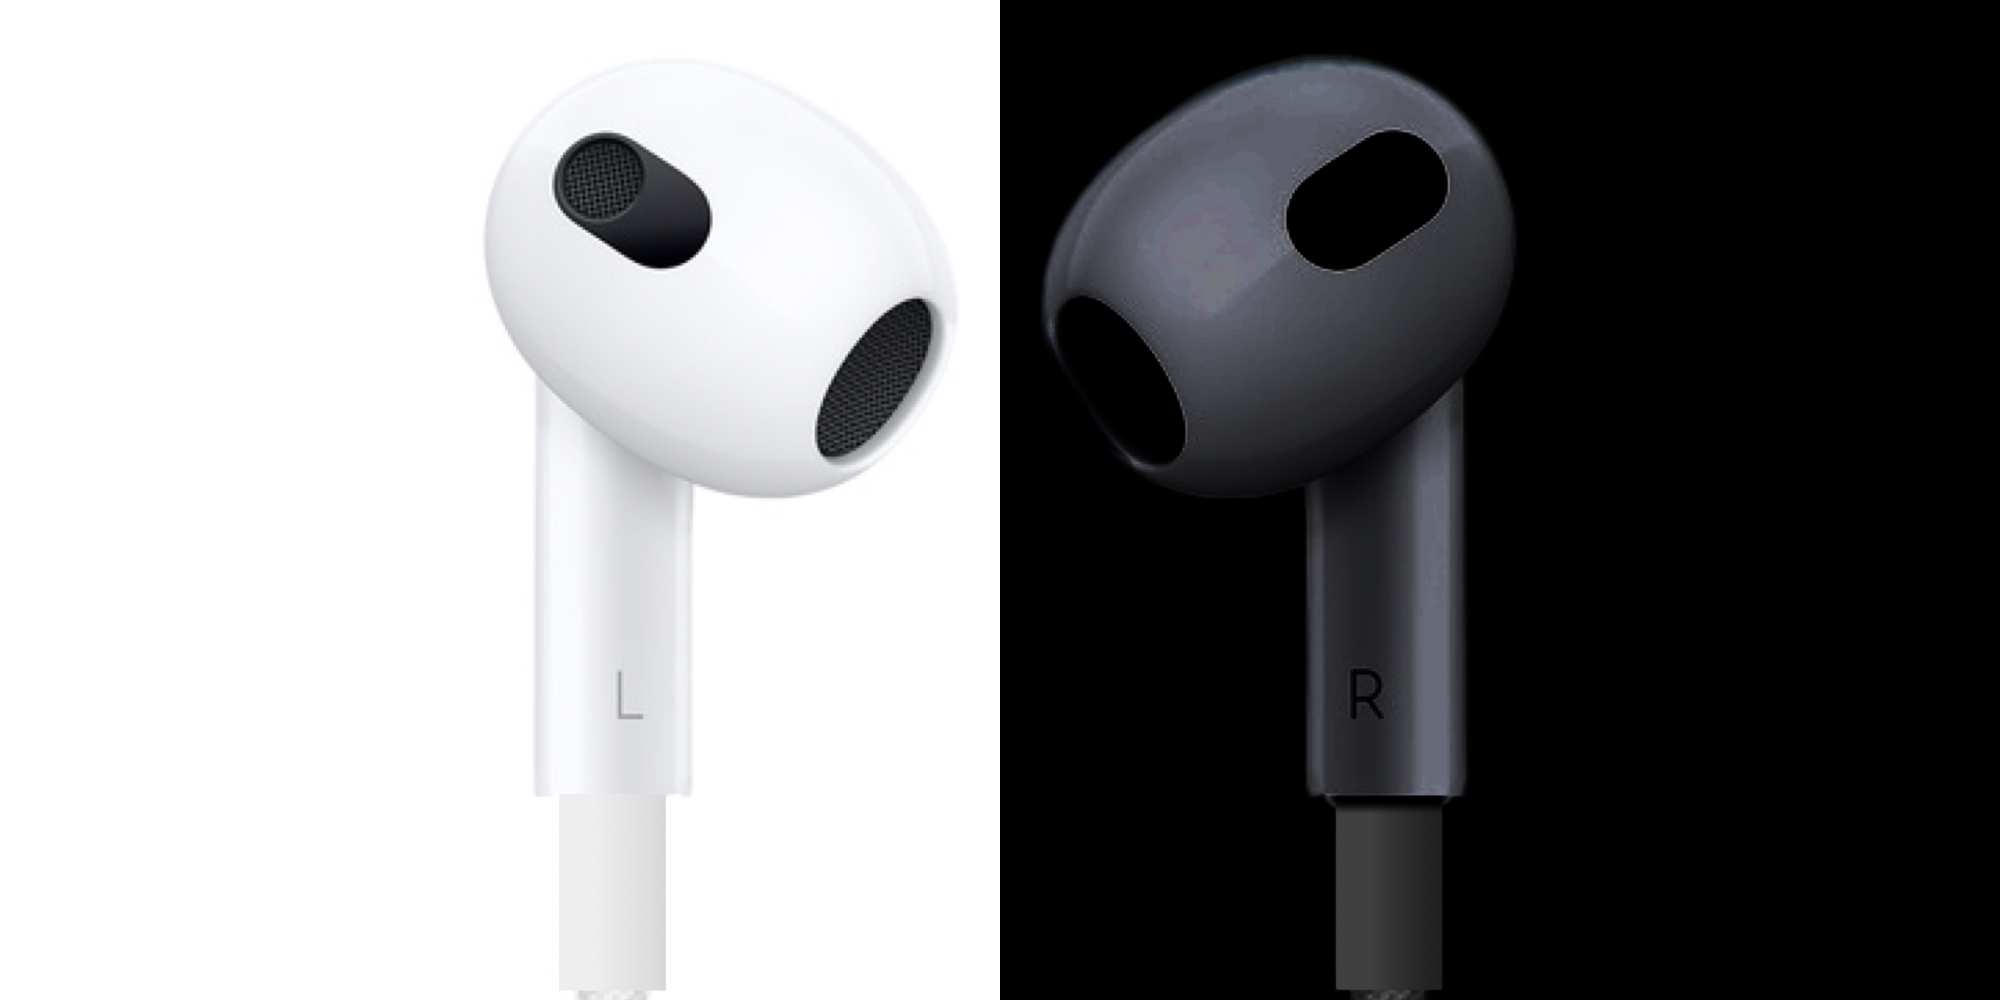 9to5Mac's EarPods concept, with one bud in white and one in black